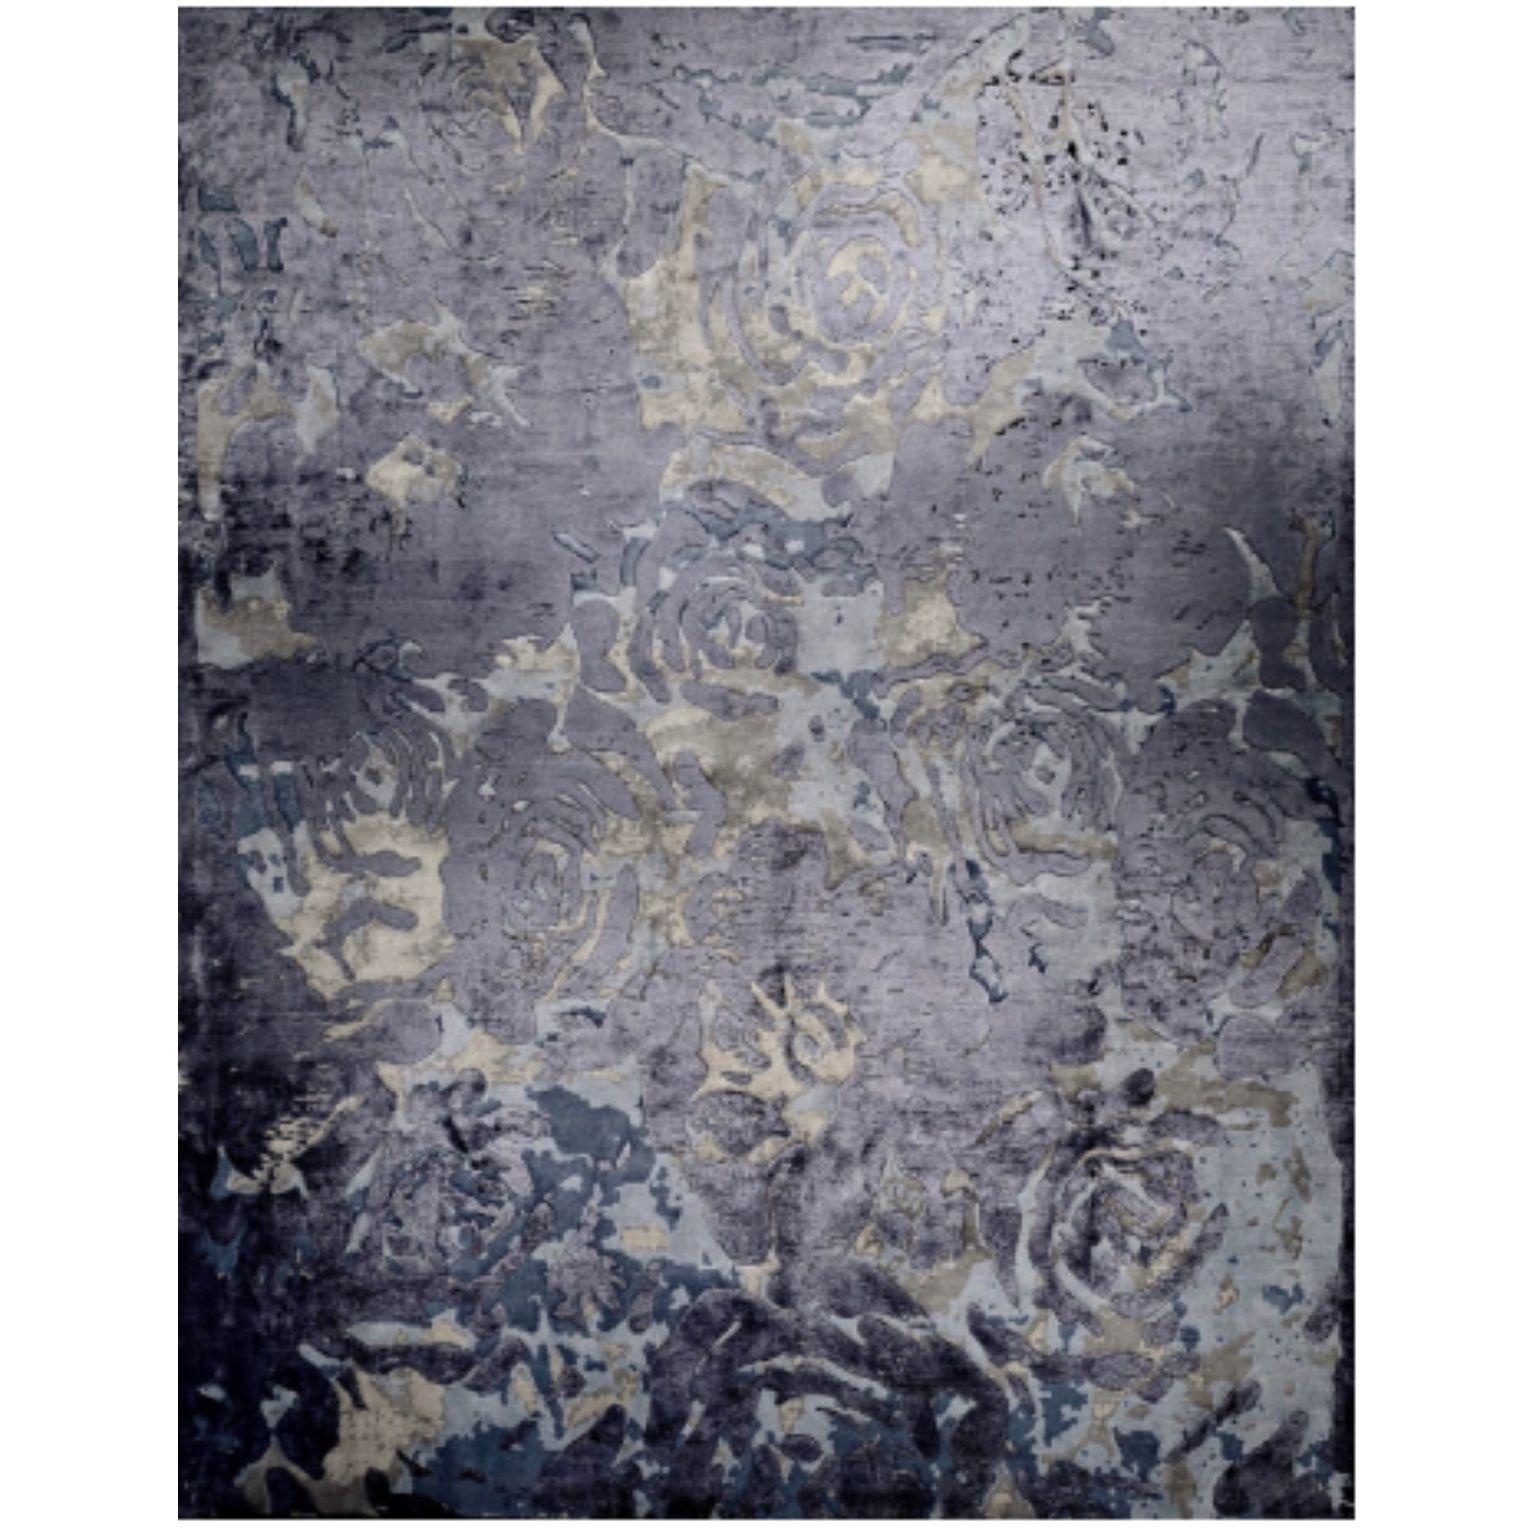 TEAROSE 200 rug by Illulian
Dimensions: D300 x H200 cm 
Materials: Wool 50% , Silk 50%
Variations available and prices may vary according to materials and sizes. 

Illulian, historic and prestigious rug company brand, internationally renowned